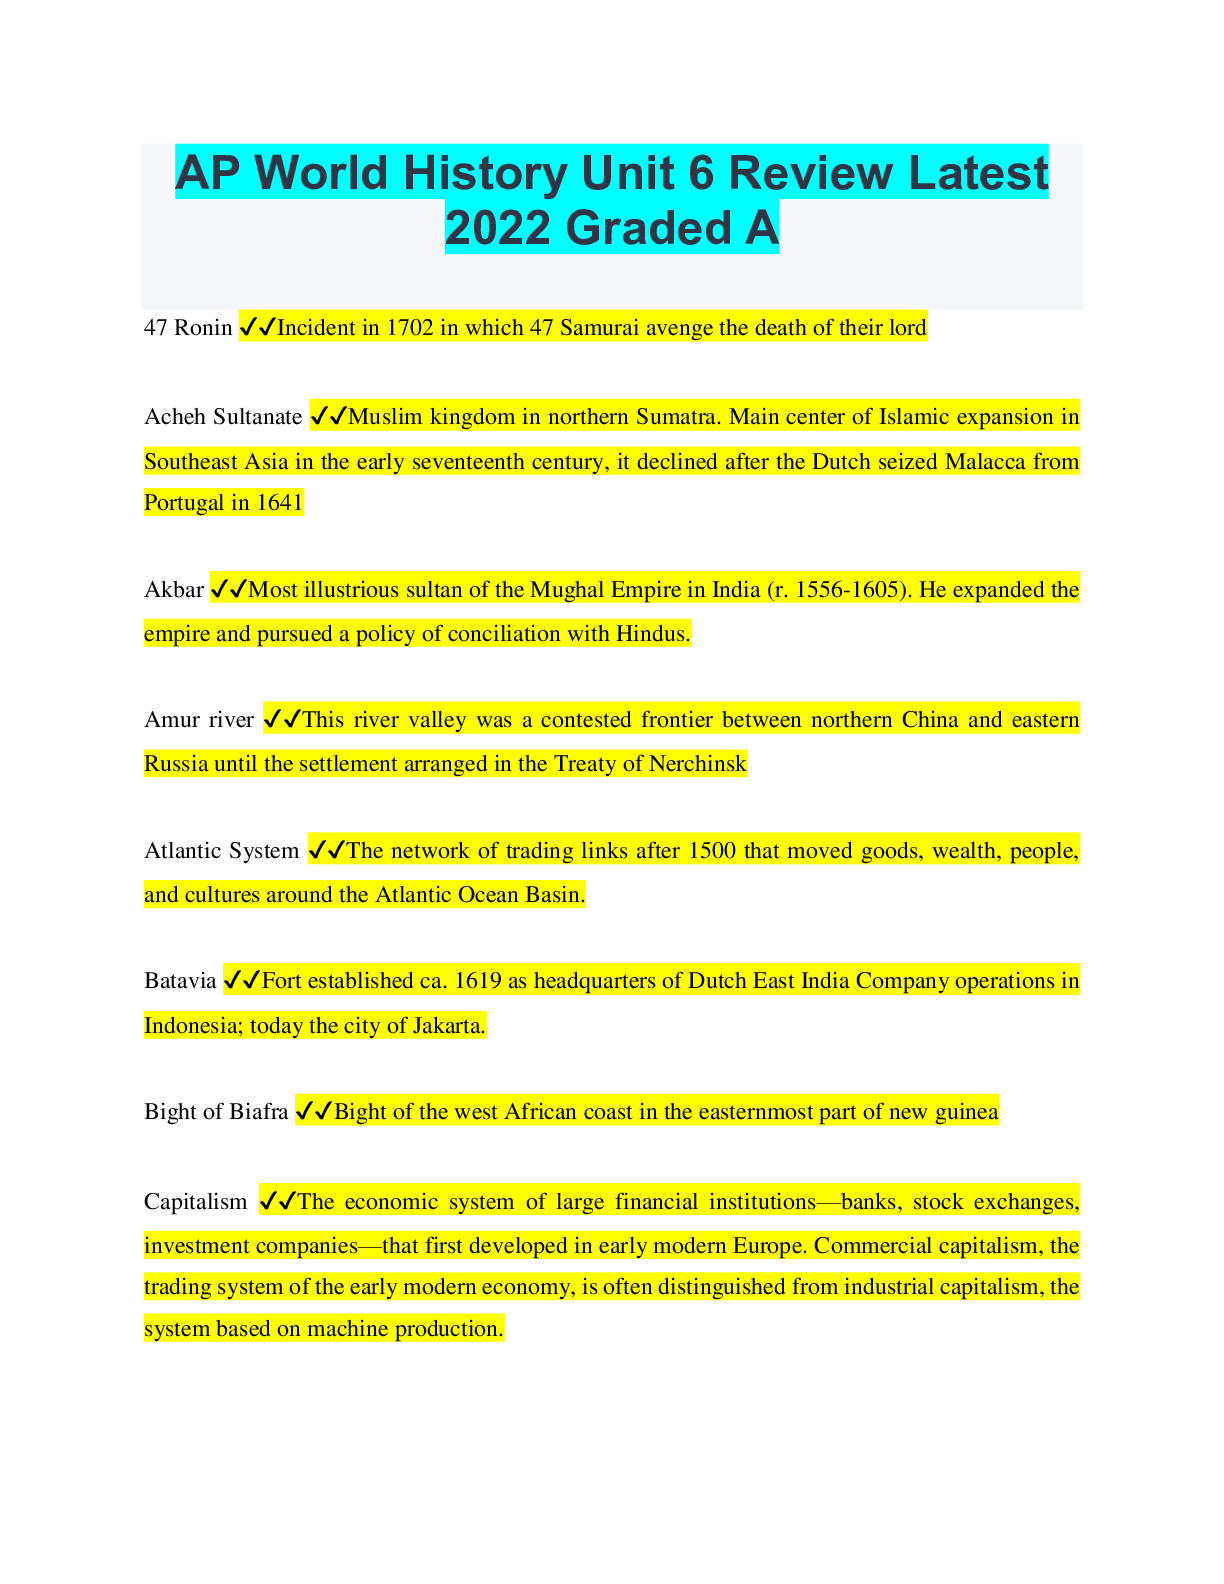 AP World History Unit 6 Review Latest 2022 Graded A Browsegrades